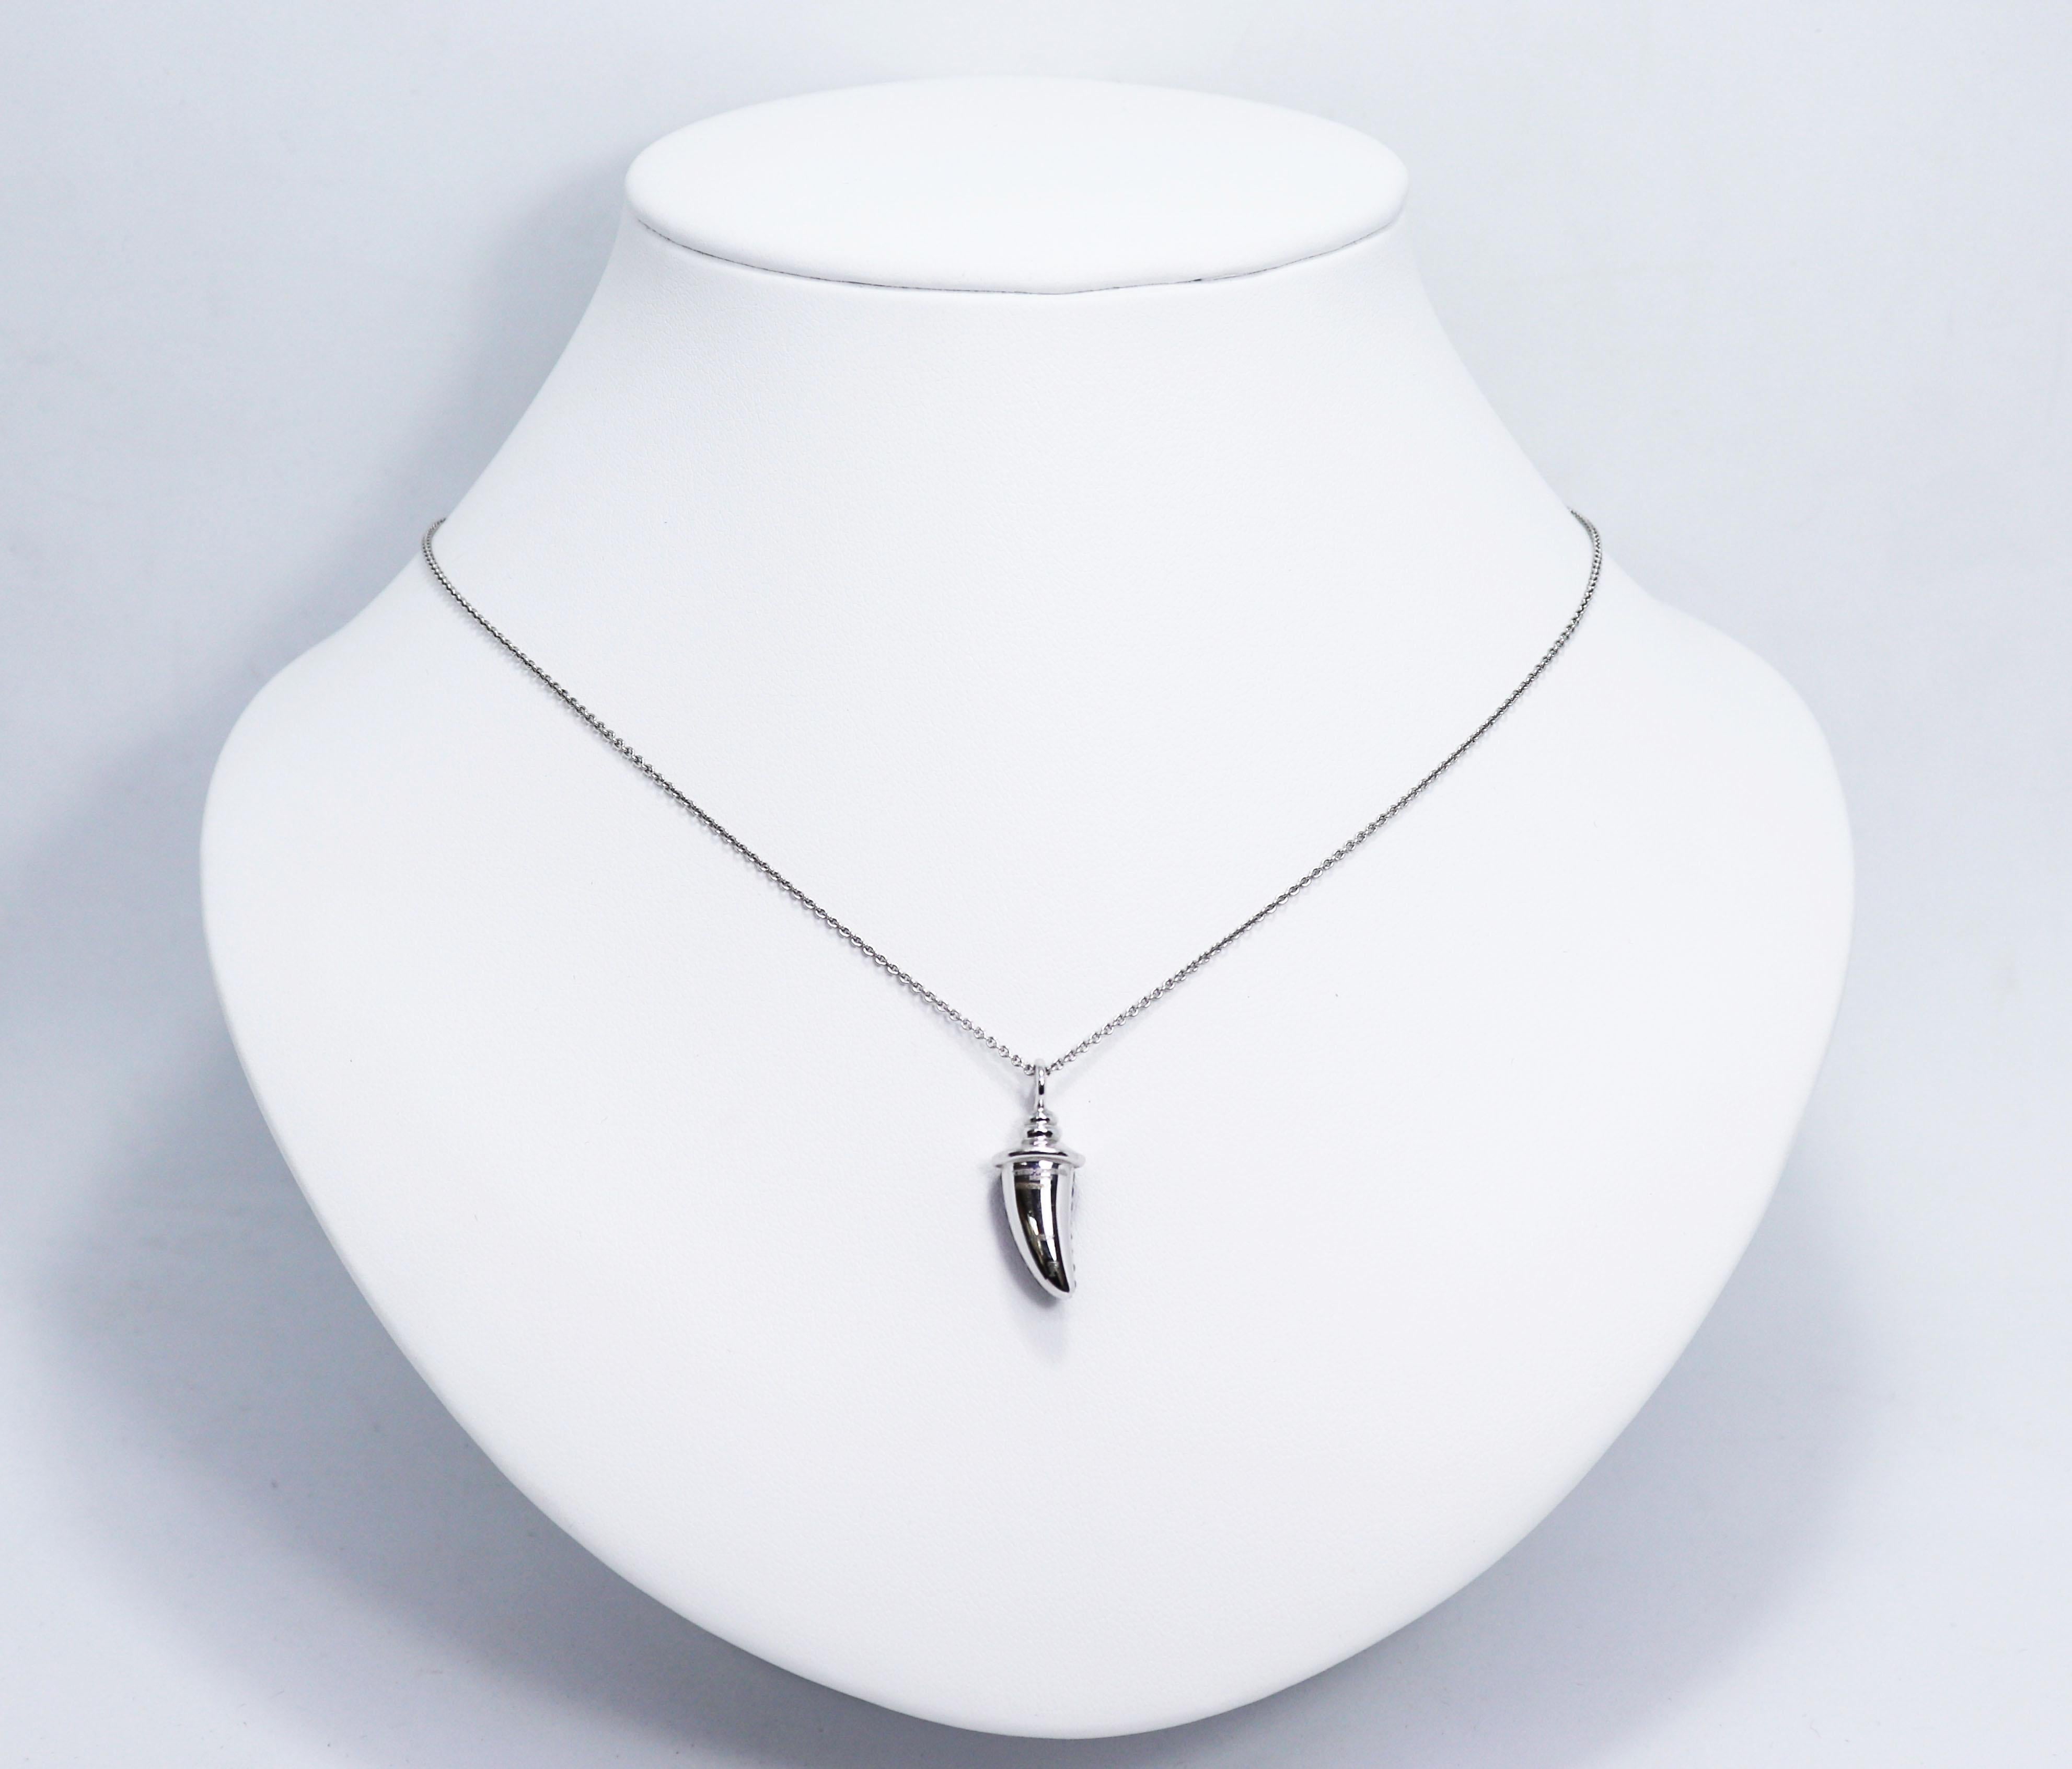 Modern Theo Fennell London 18 Carat White Gold and Black Diamond Horn Pendant and Chain